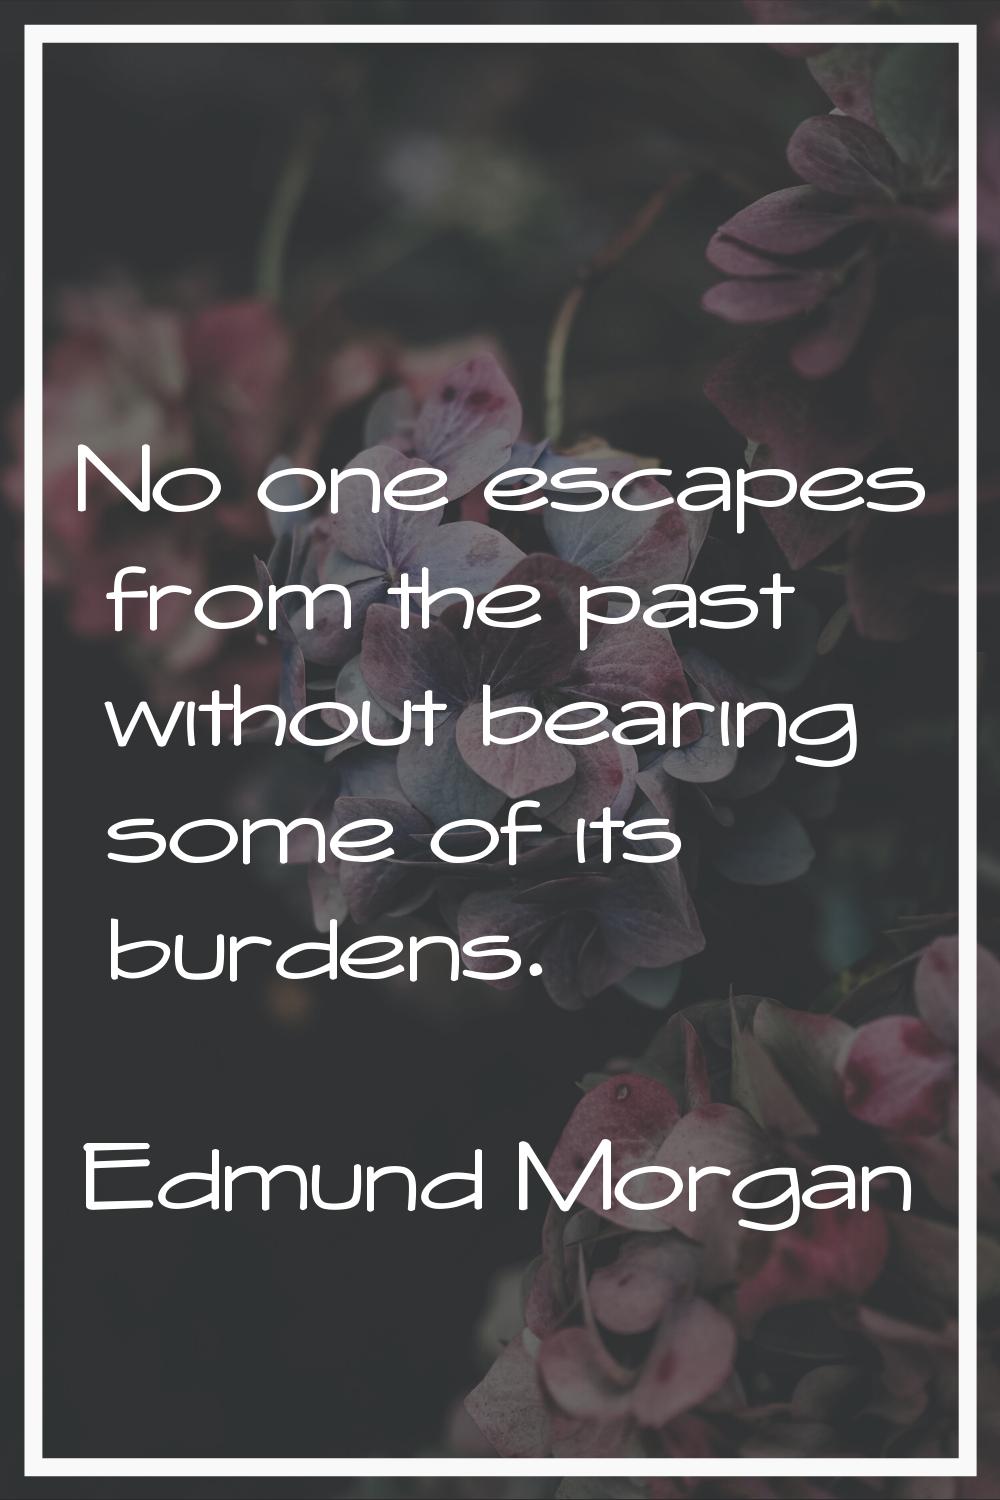 No one escapes from the past without bearing some of its burdens.